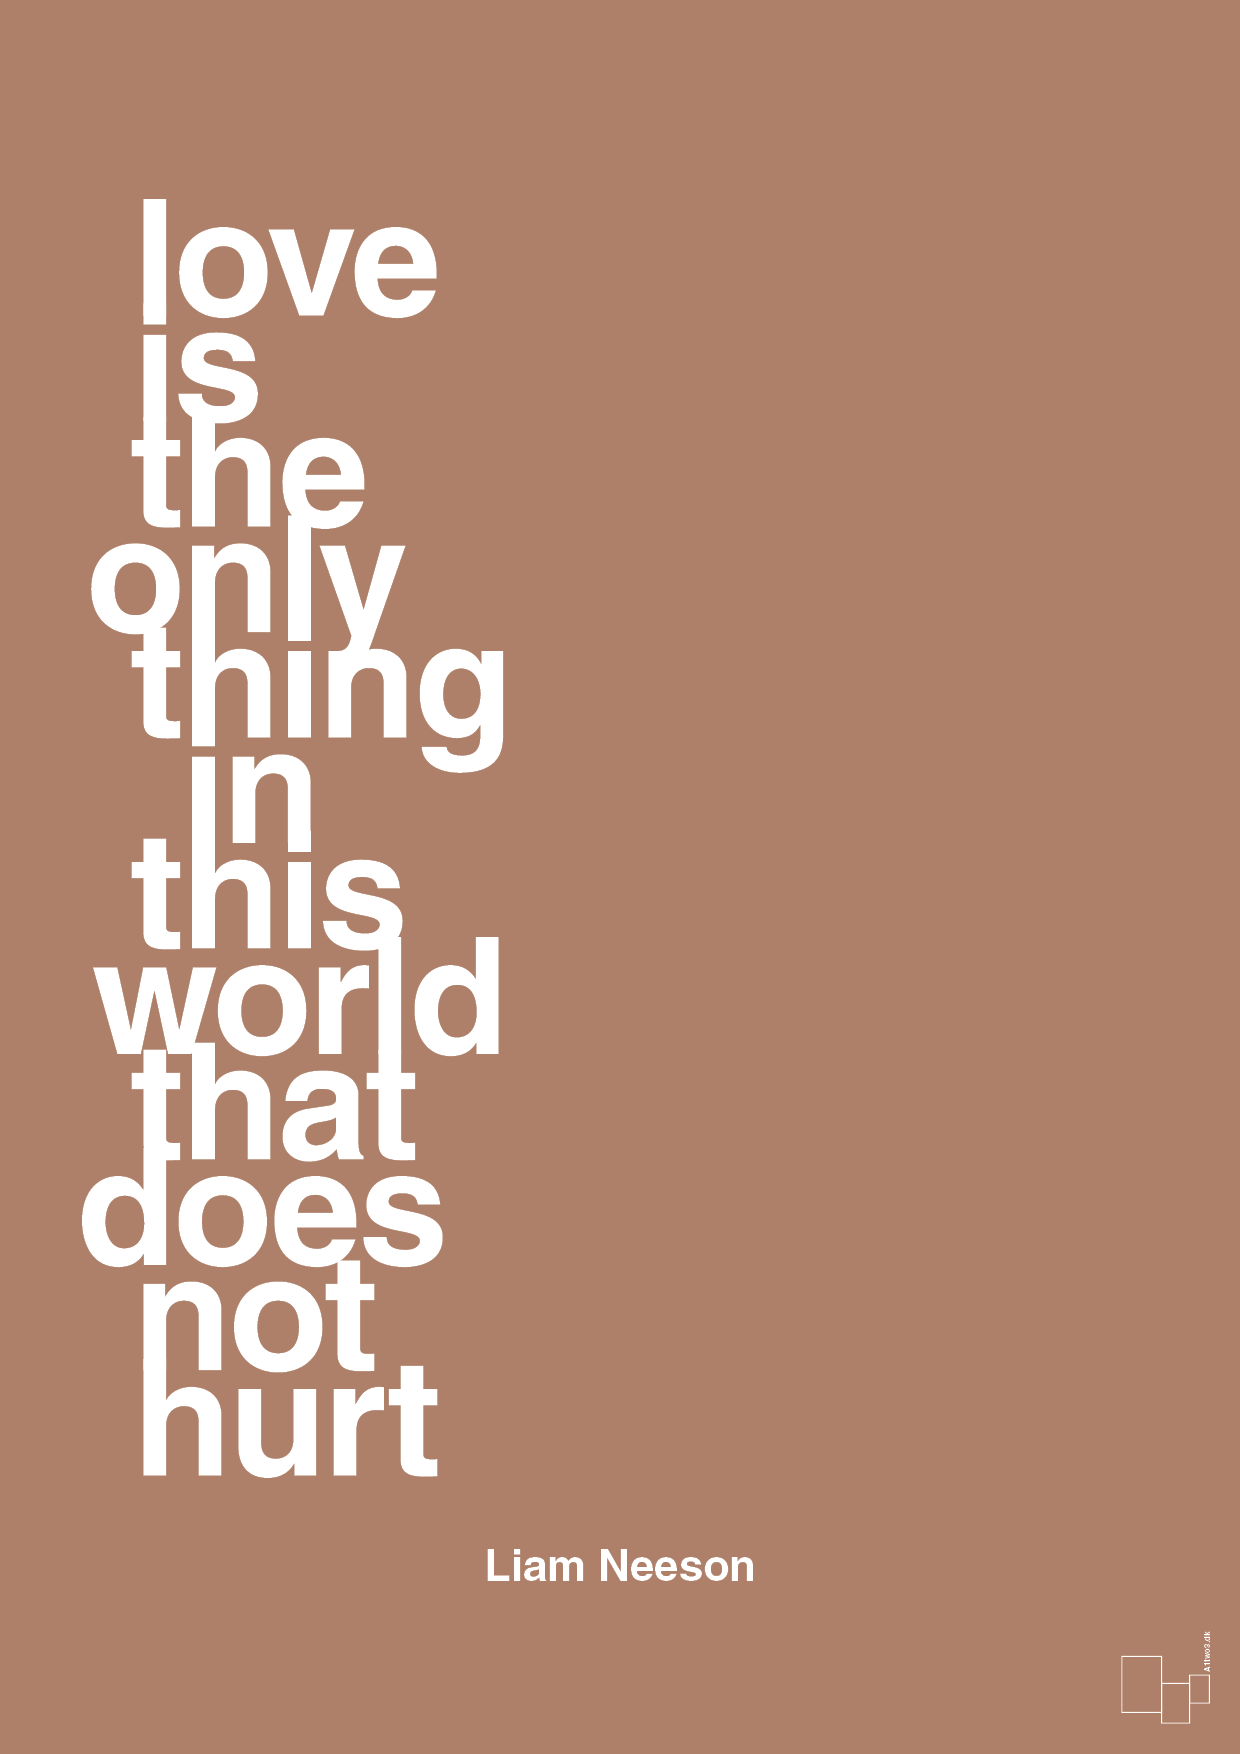 love is the only thing in this world that does not hurt - Plakat med Citater i Cider Spice